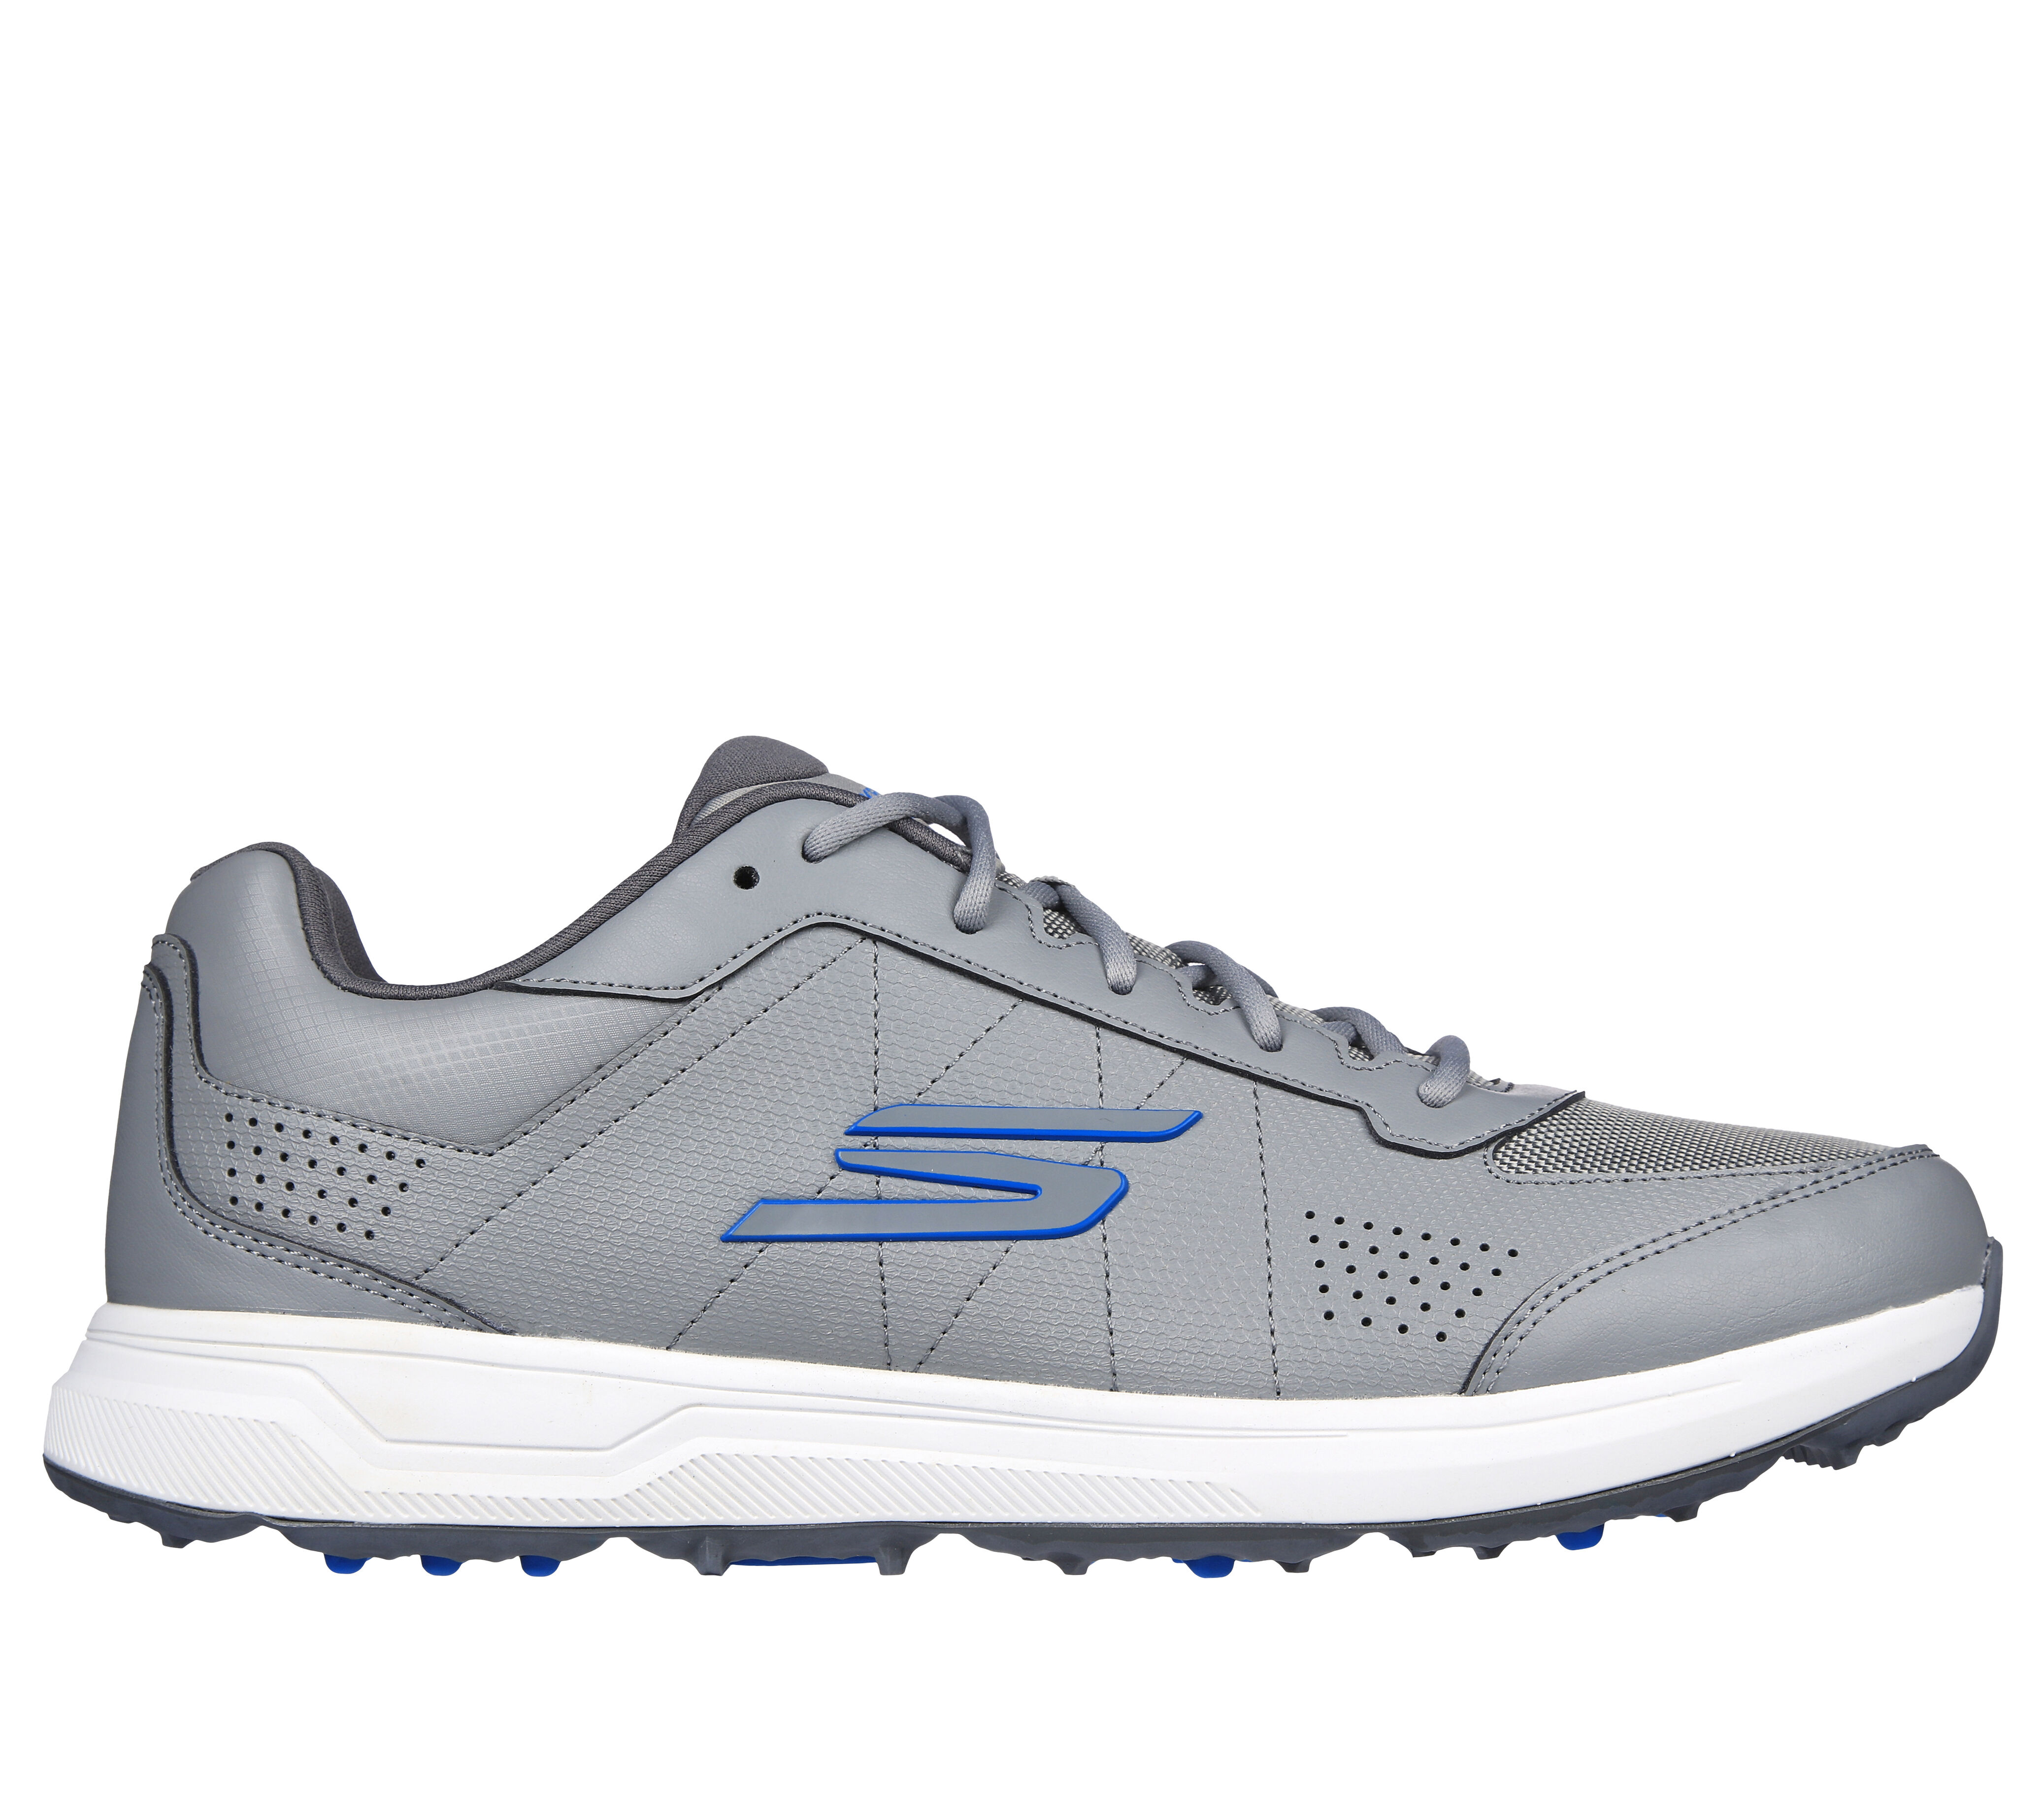 Shop the Relaxed Fit: GO GOLF Prime | SKECHERS CA